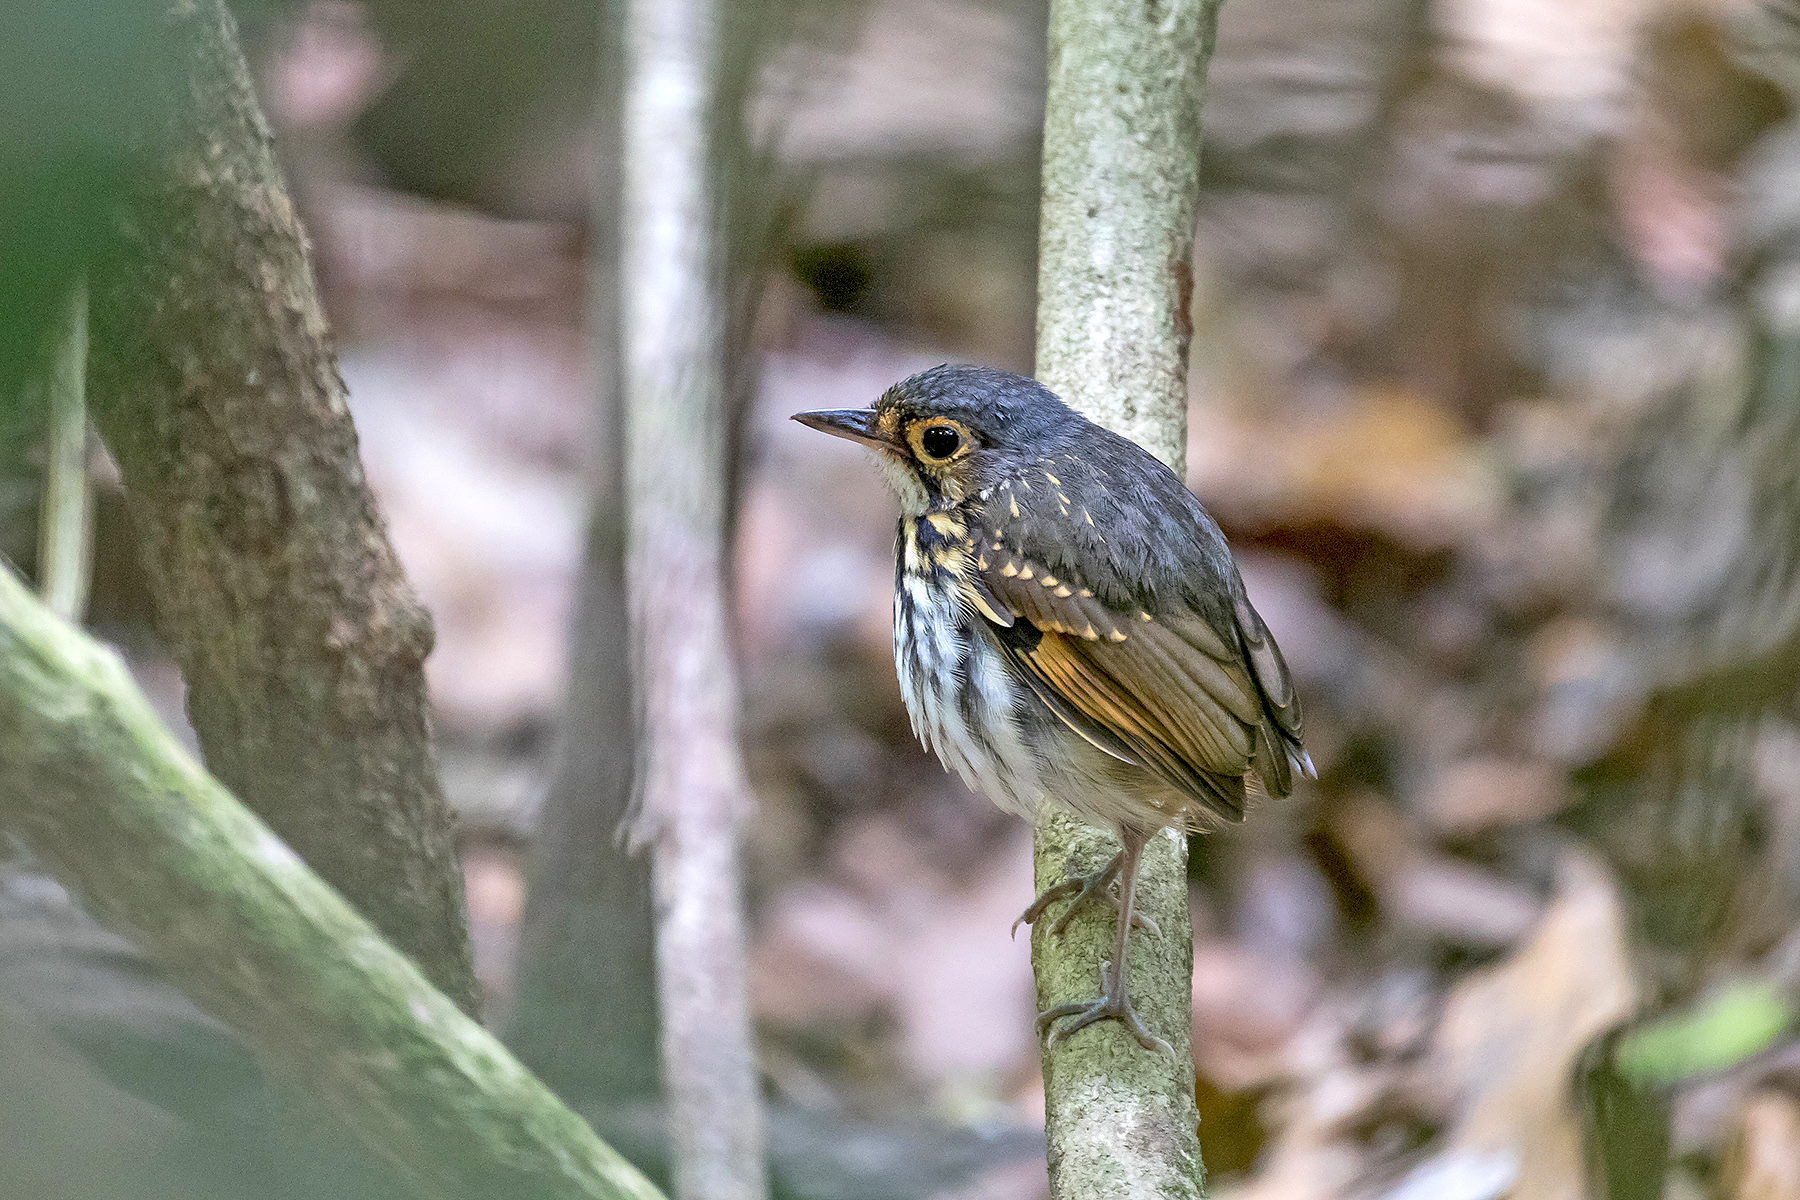 Streak-chested Antpitta in Costa Rica (image by Pete Morris)